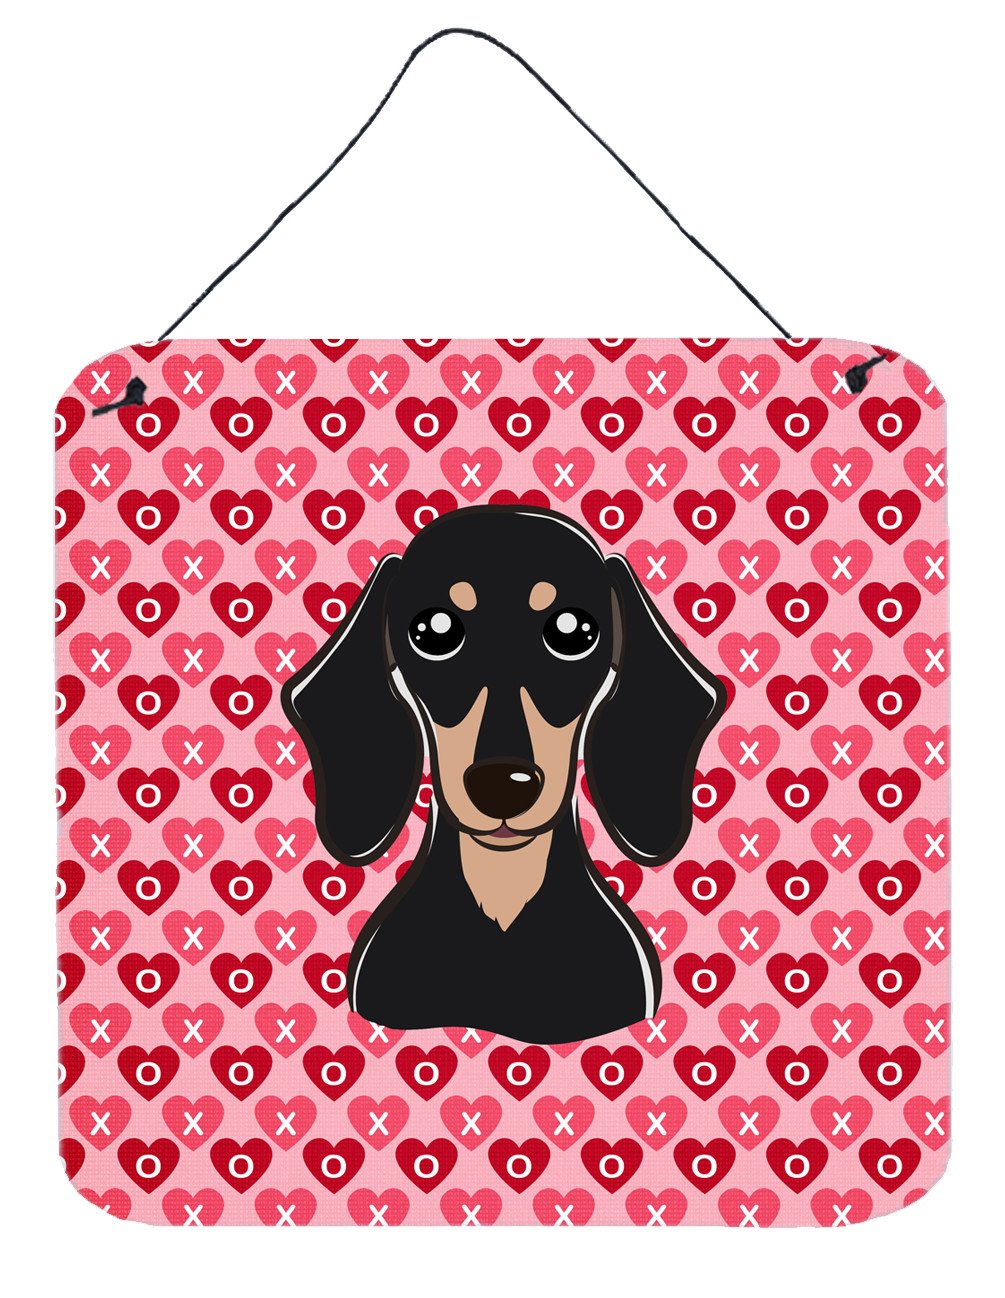 Smooth Black and Tan Dachshund Hearts Wall or Door Hanging Prints BB5285DS66 by Caroline's Treasures